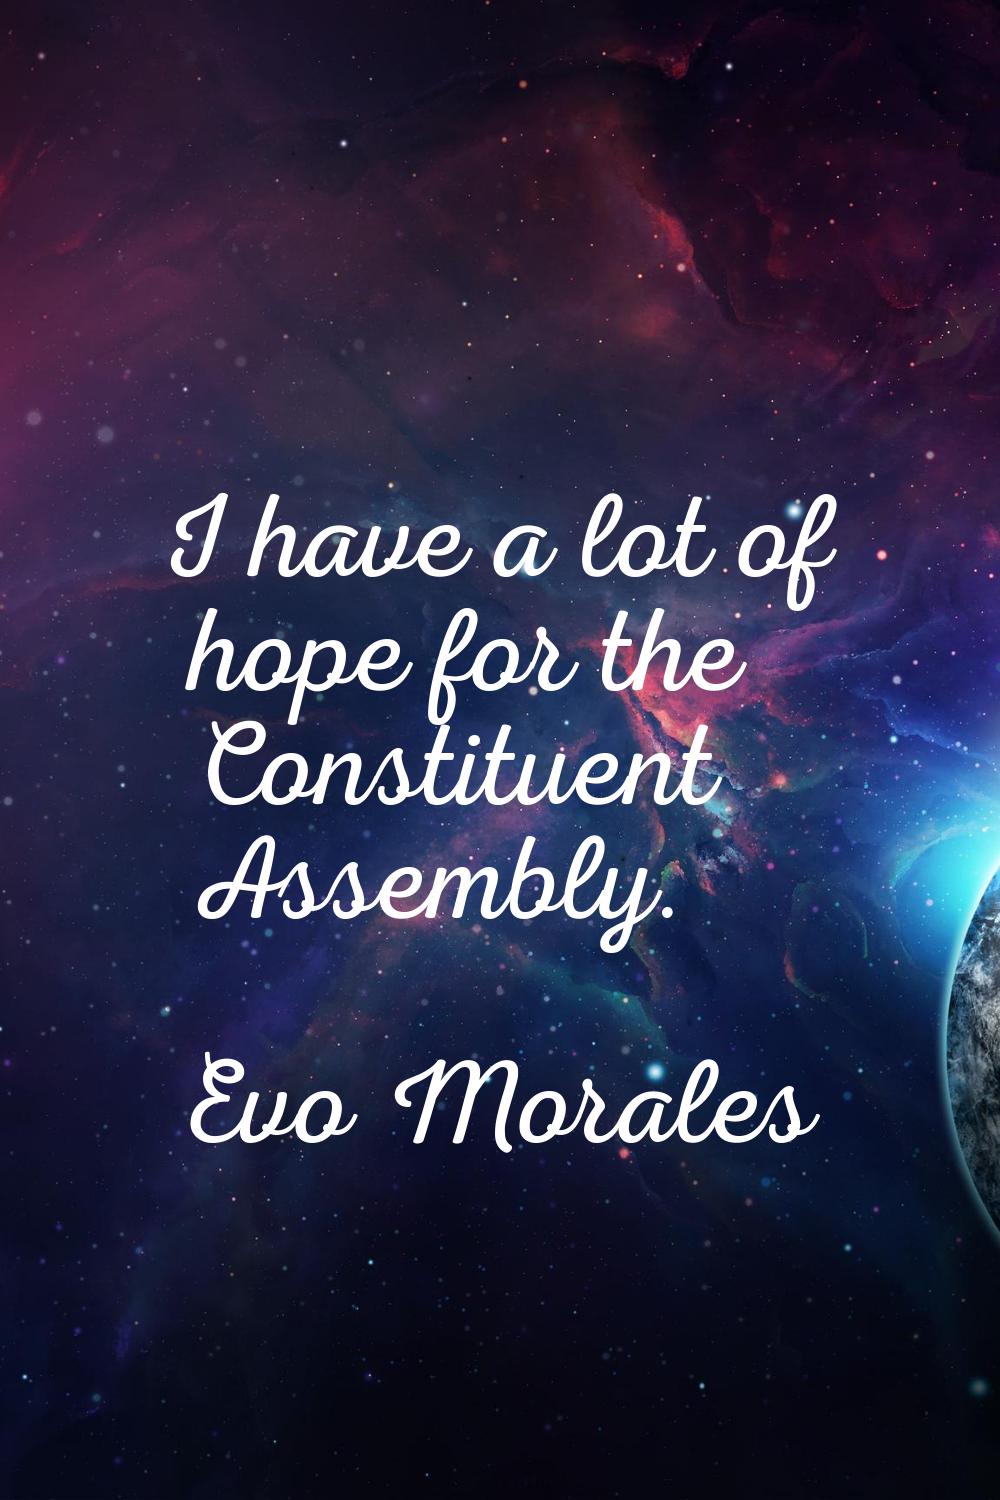 I have a lot of hope for the Constituent Assembly.